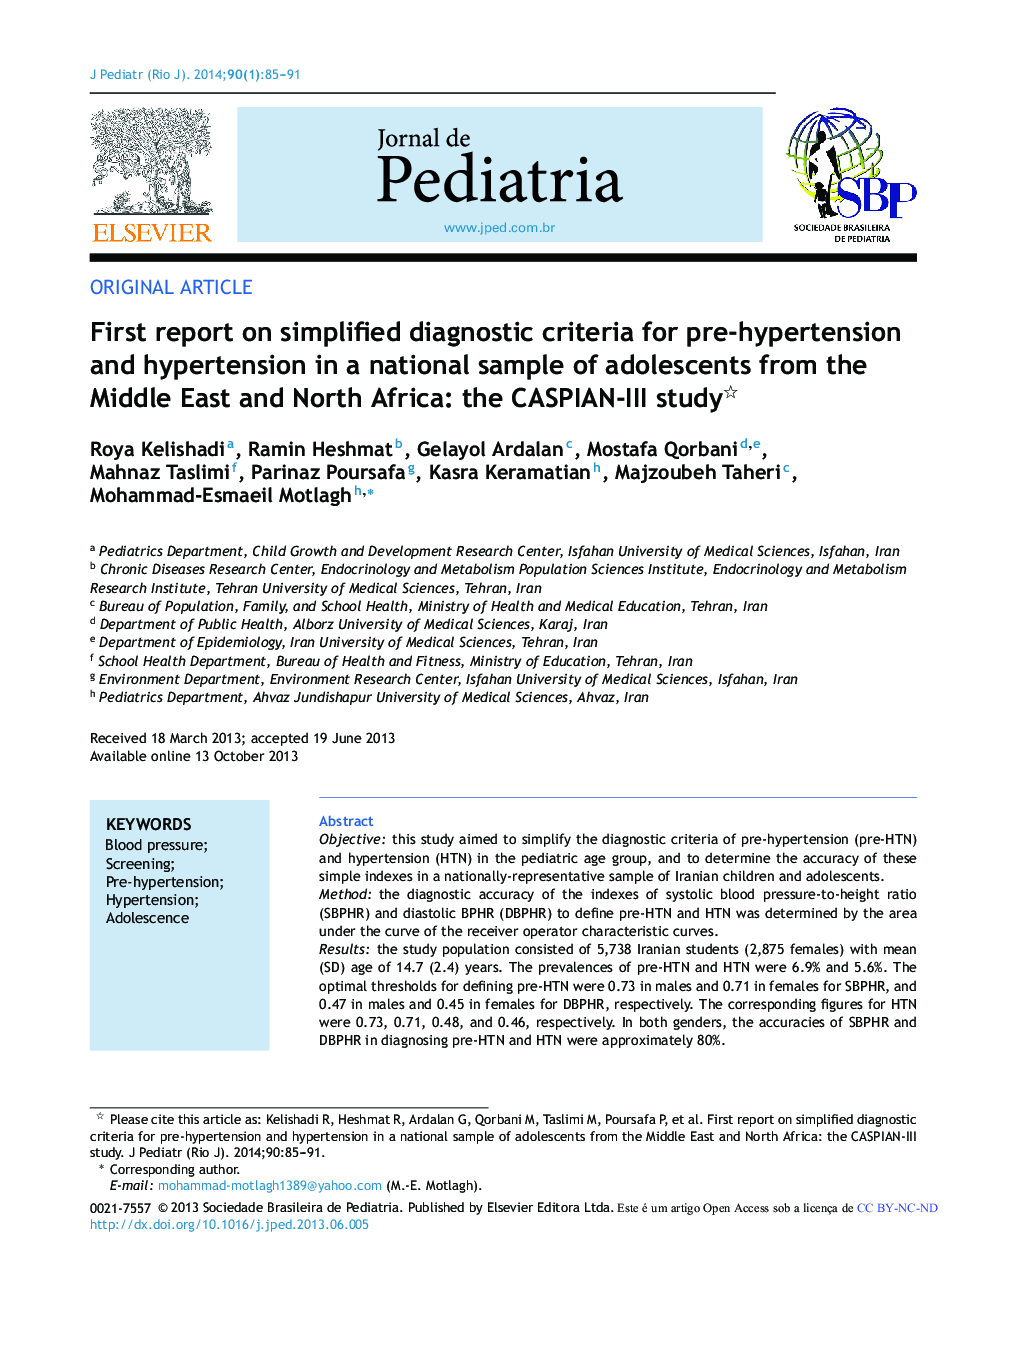 First report on simplified diagnostic criteria for pre-hypertension and hypertension in a national sample of adolescents from the Middle East and North Africa: the CASPIAN-III study 